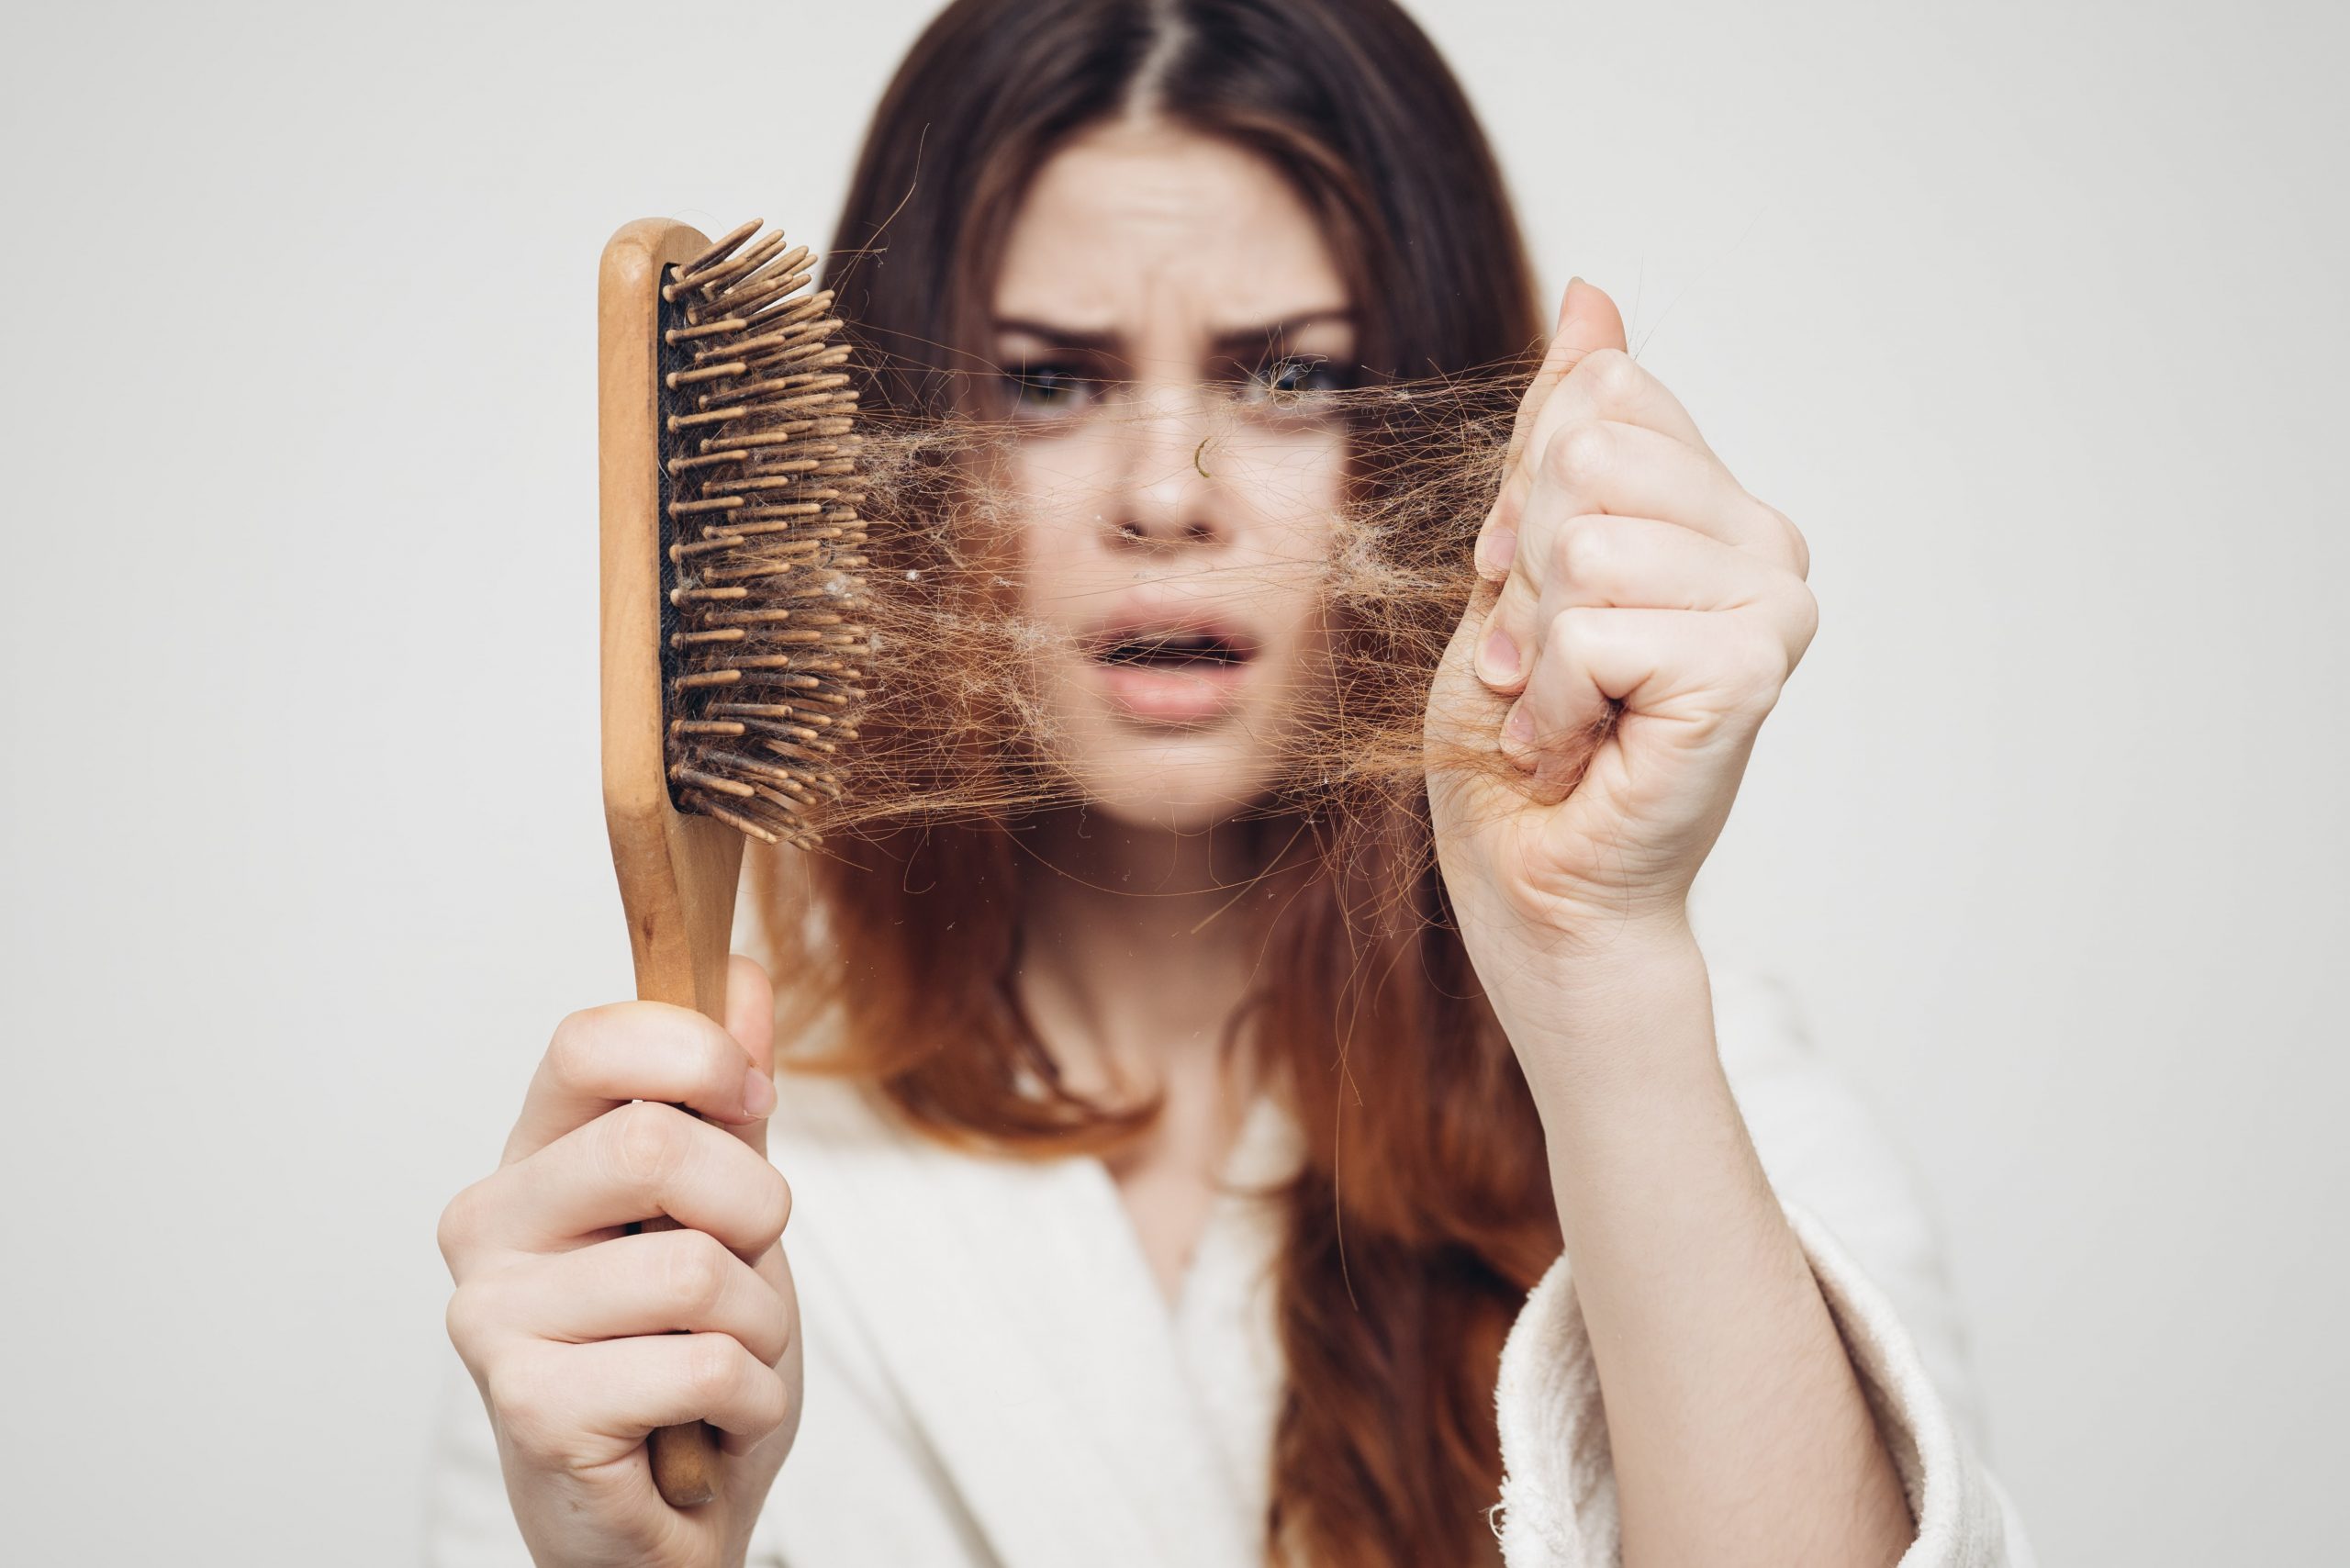 Hair Loss Recovery Guide: Your Way Back To Healthy Hair